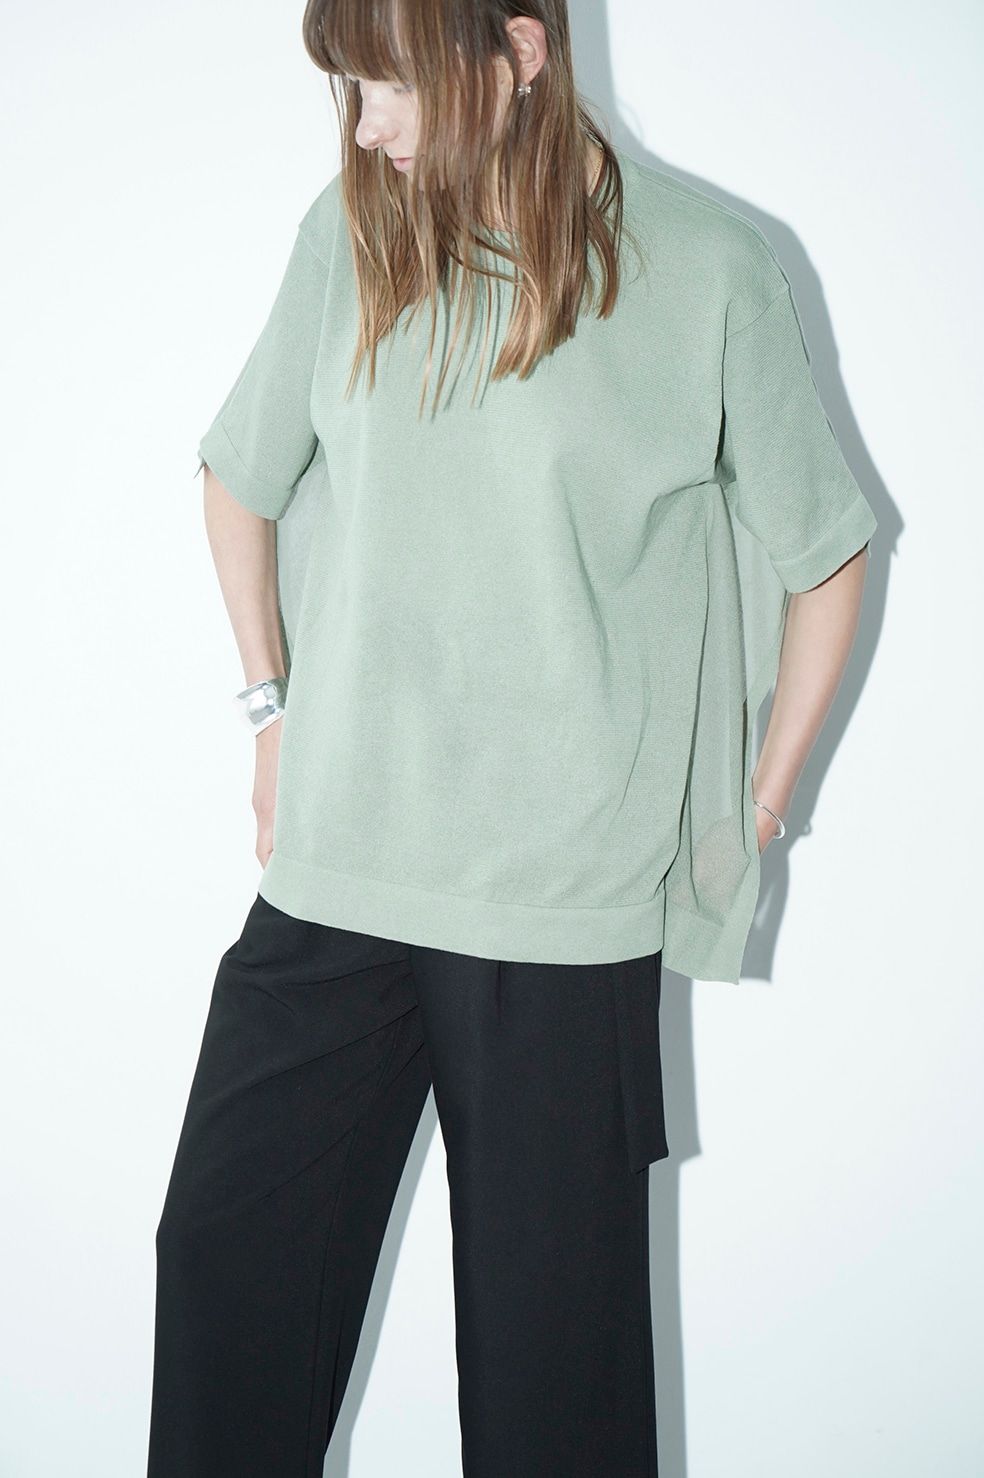 CLANE - シアー スクエア ニット トップス - SHEER SQUARE KNIT TOPS